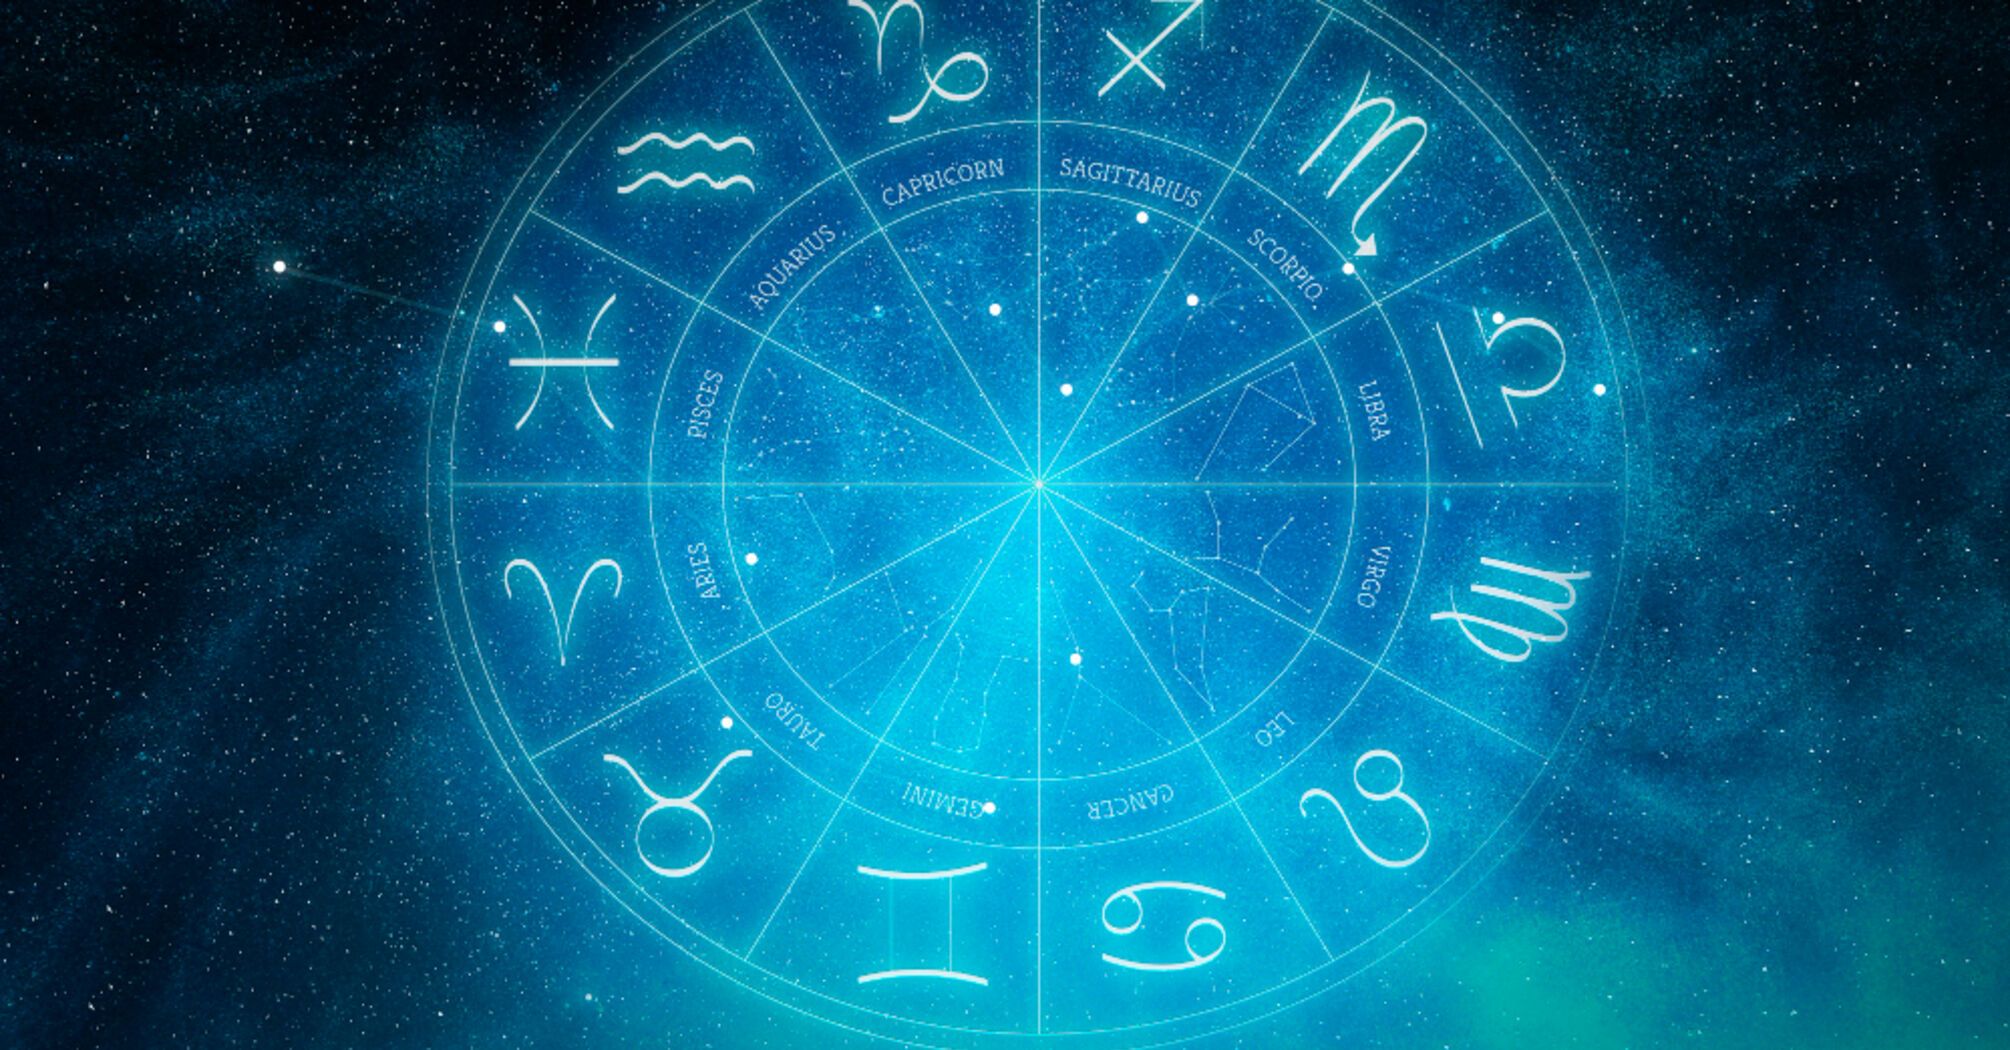 Time to trust your instincts and achieve goals with openness: horoscope for all zodiac signs for April 30